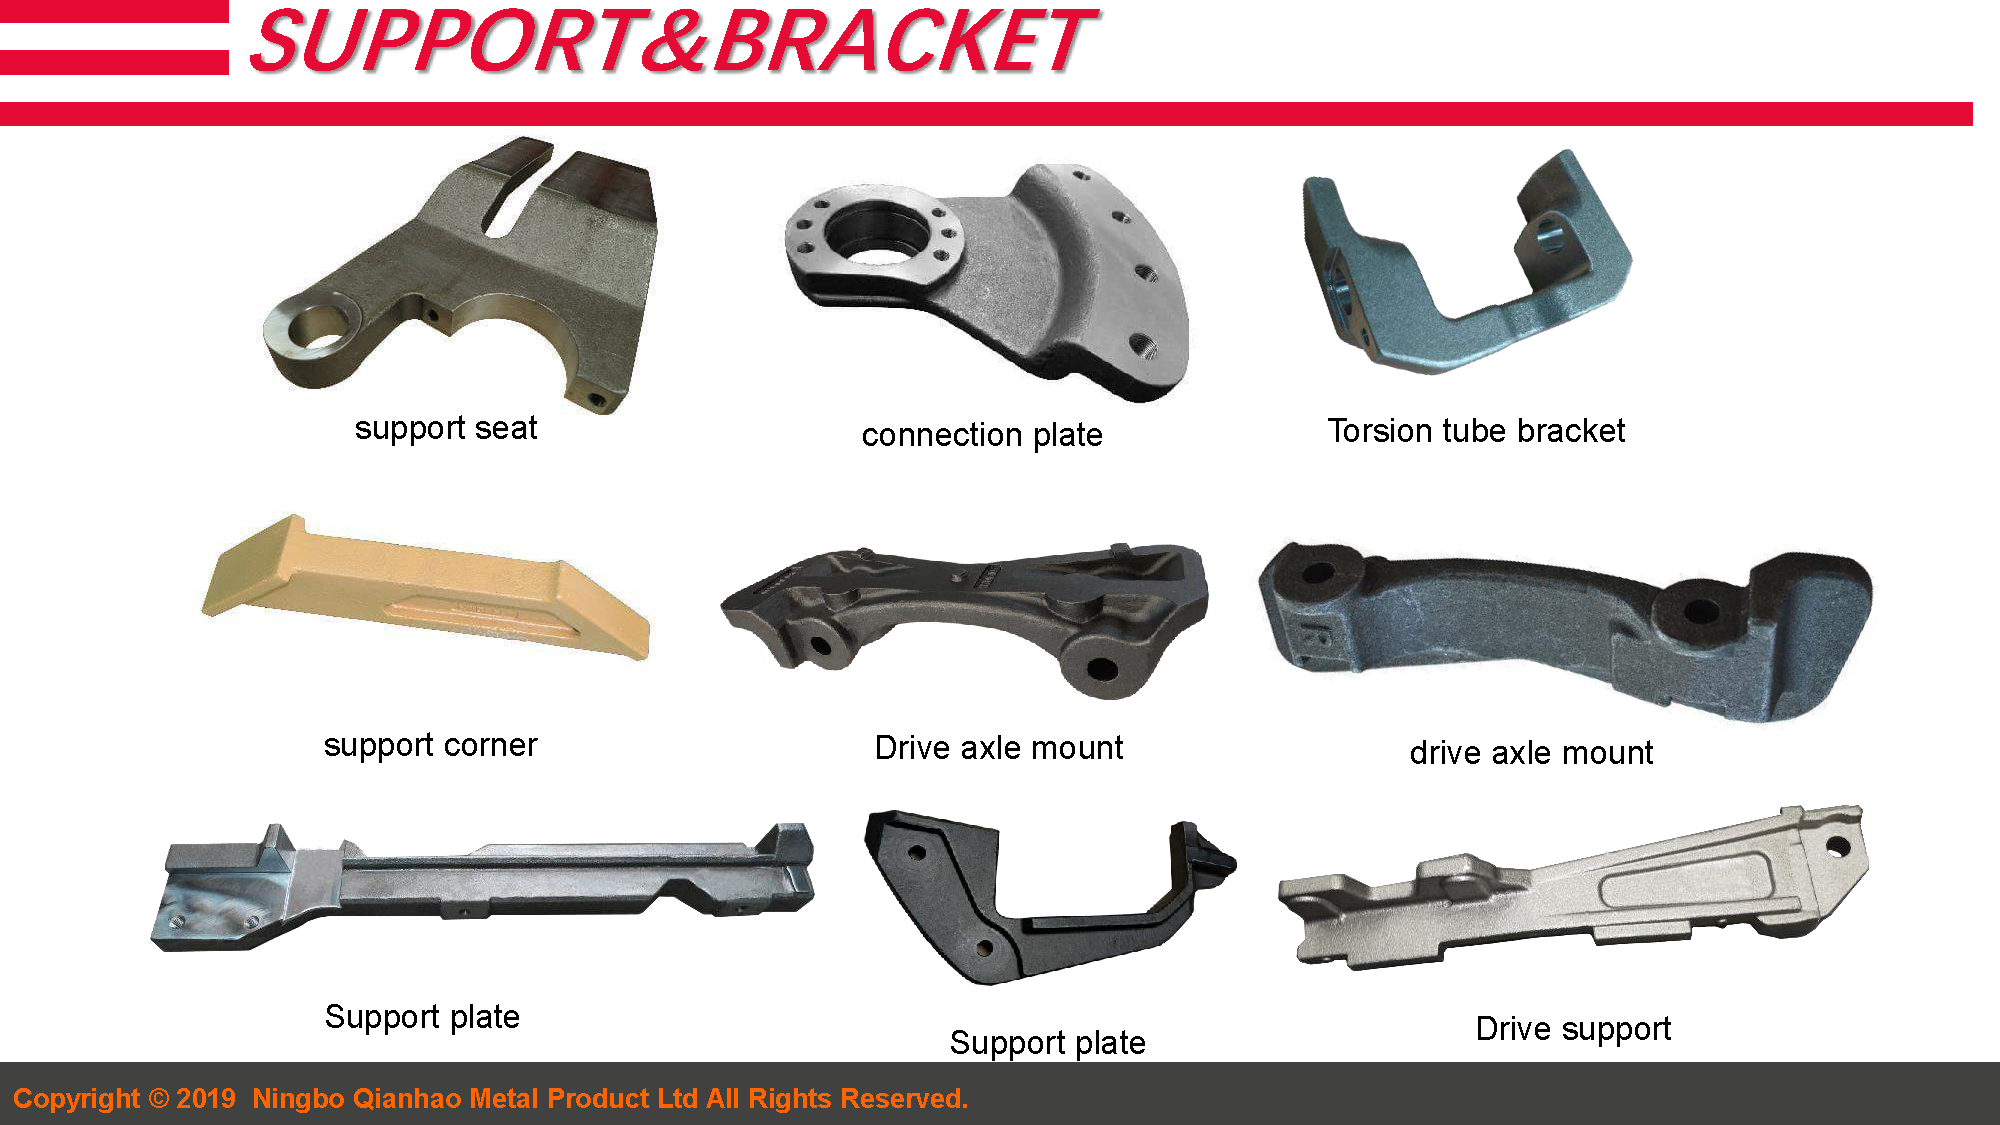 2.Forklift Components Capacity Introduction 19.4.9(图19)